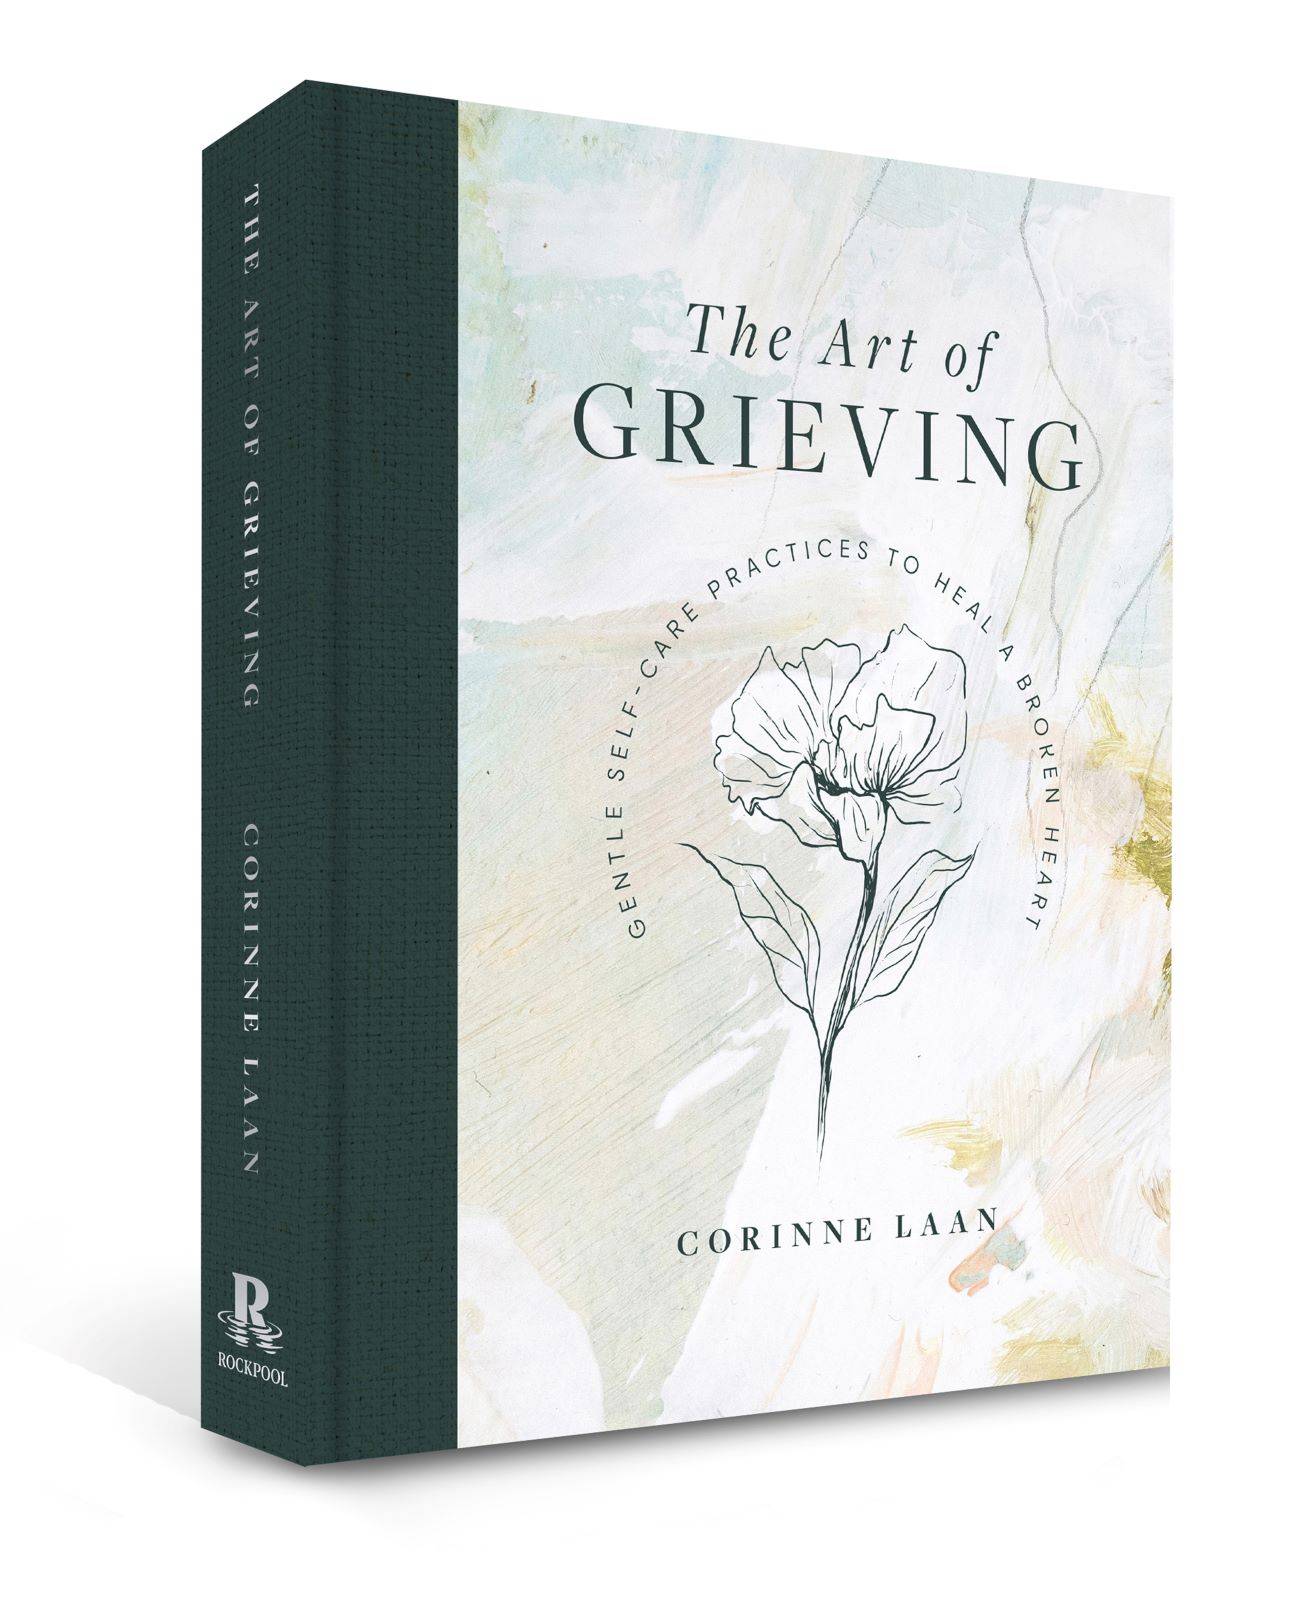 The Art of Grieving book jacket